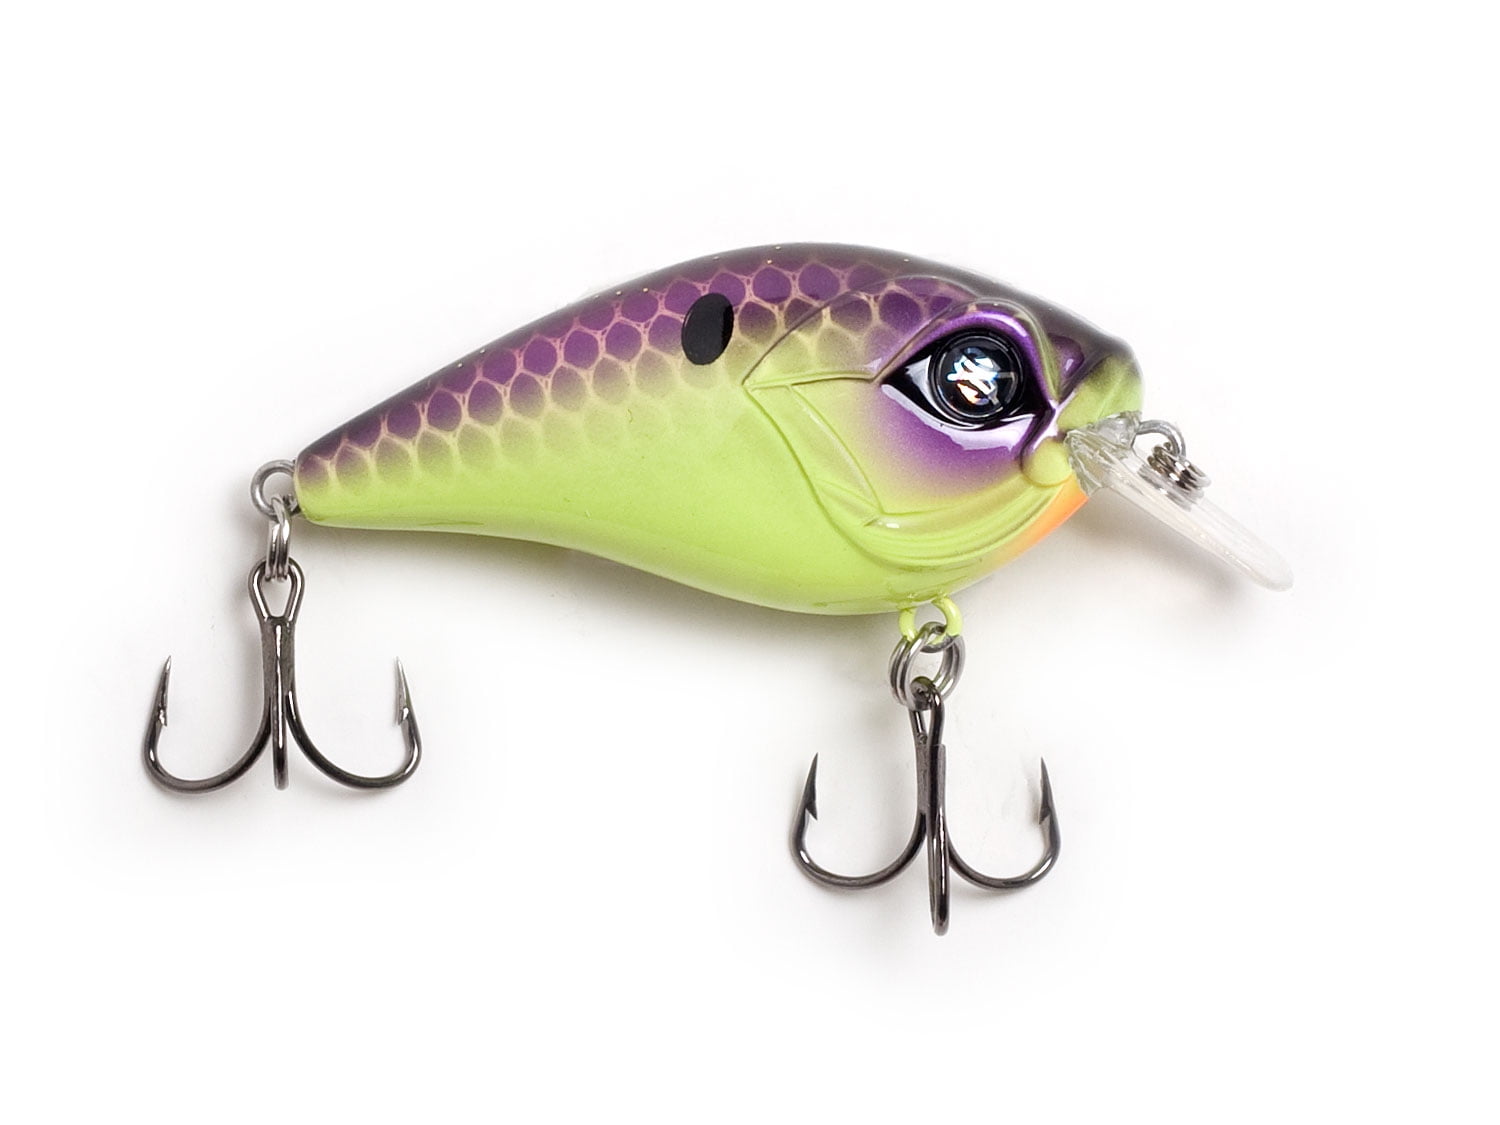 Details about   Googan Squad Klutch Fishing Lures 